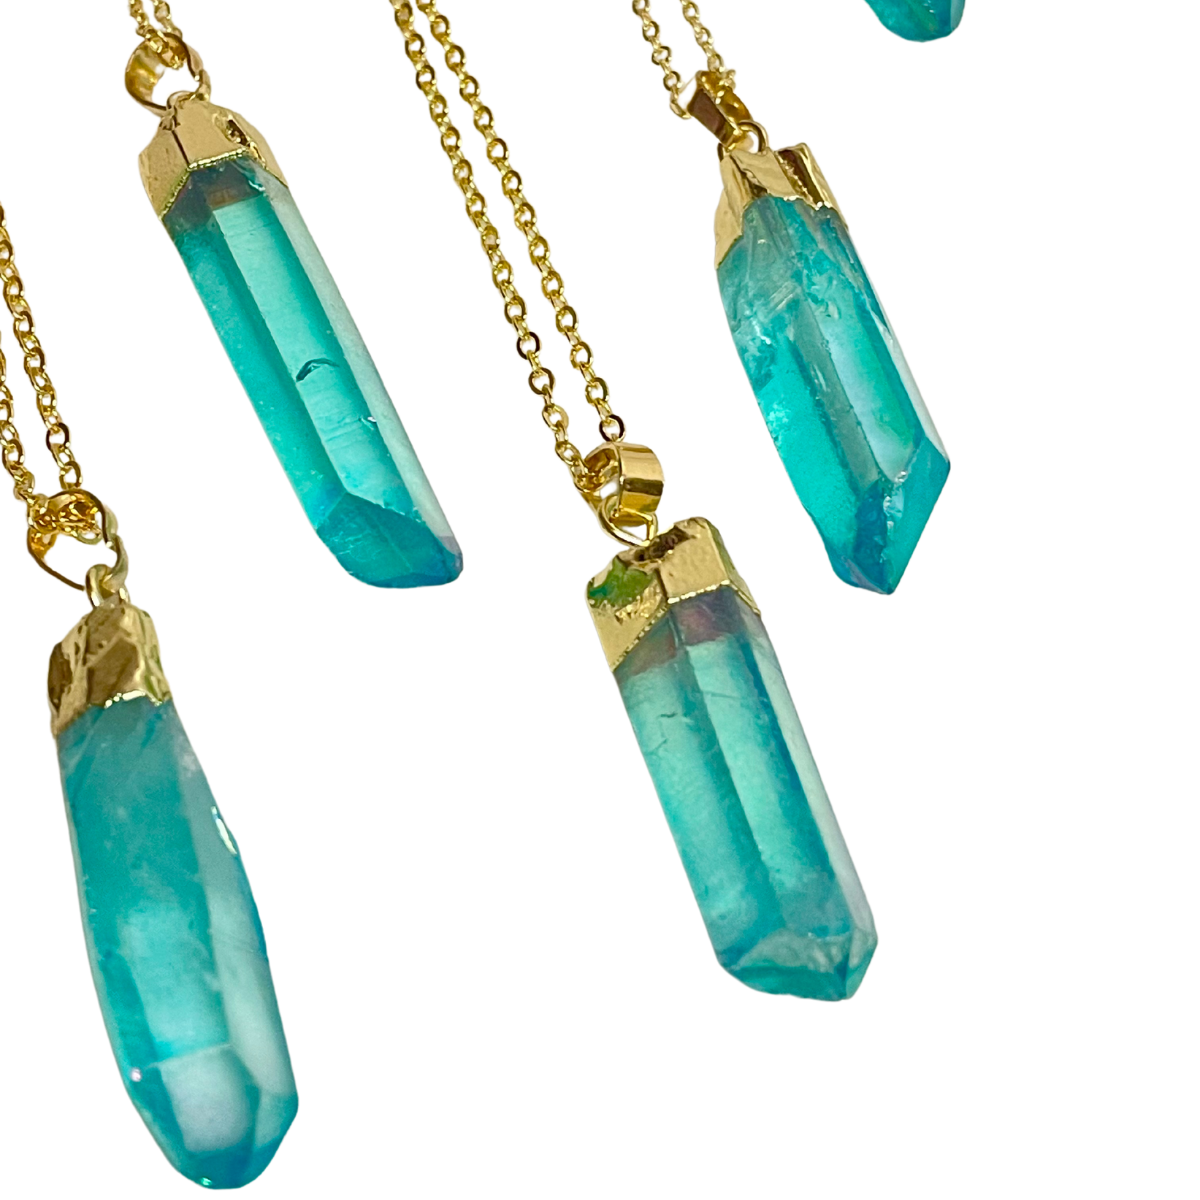 WT-N495 Wholesale Aqua Aura Crystal Pendant With Gold Capped Top Chain  Quartz Necklace Natural Jewelry Beaded Finding - AliExpress